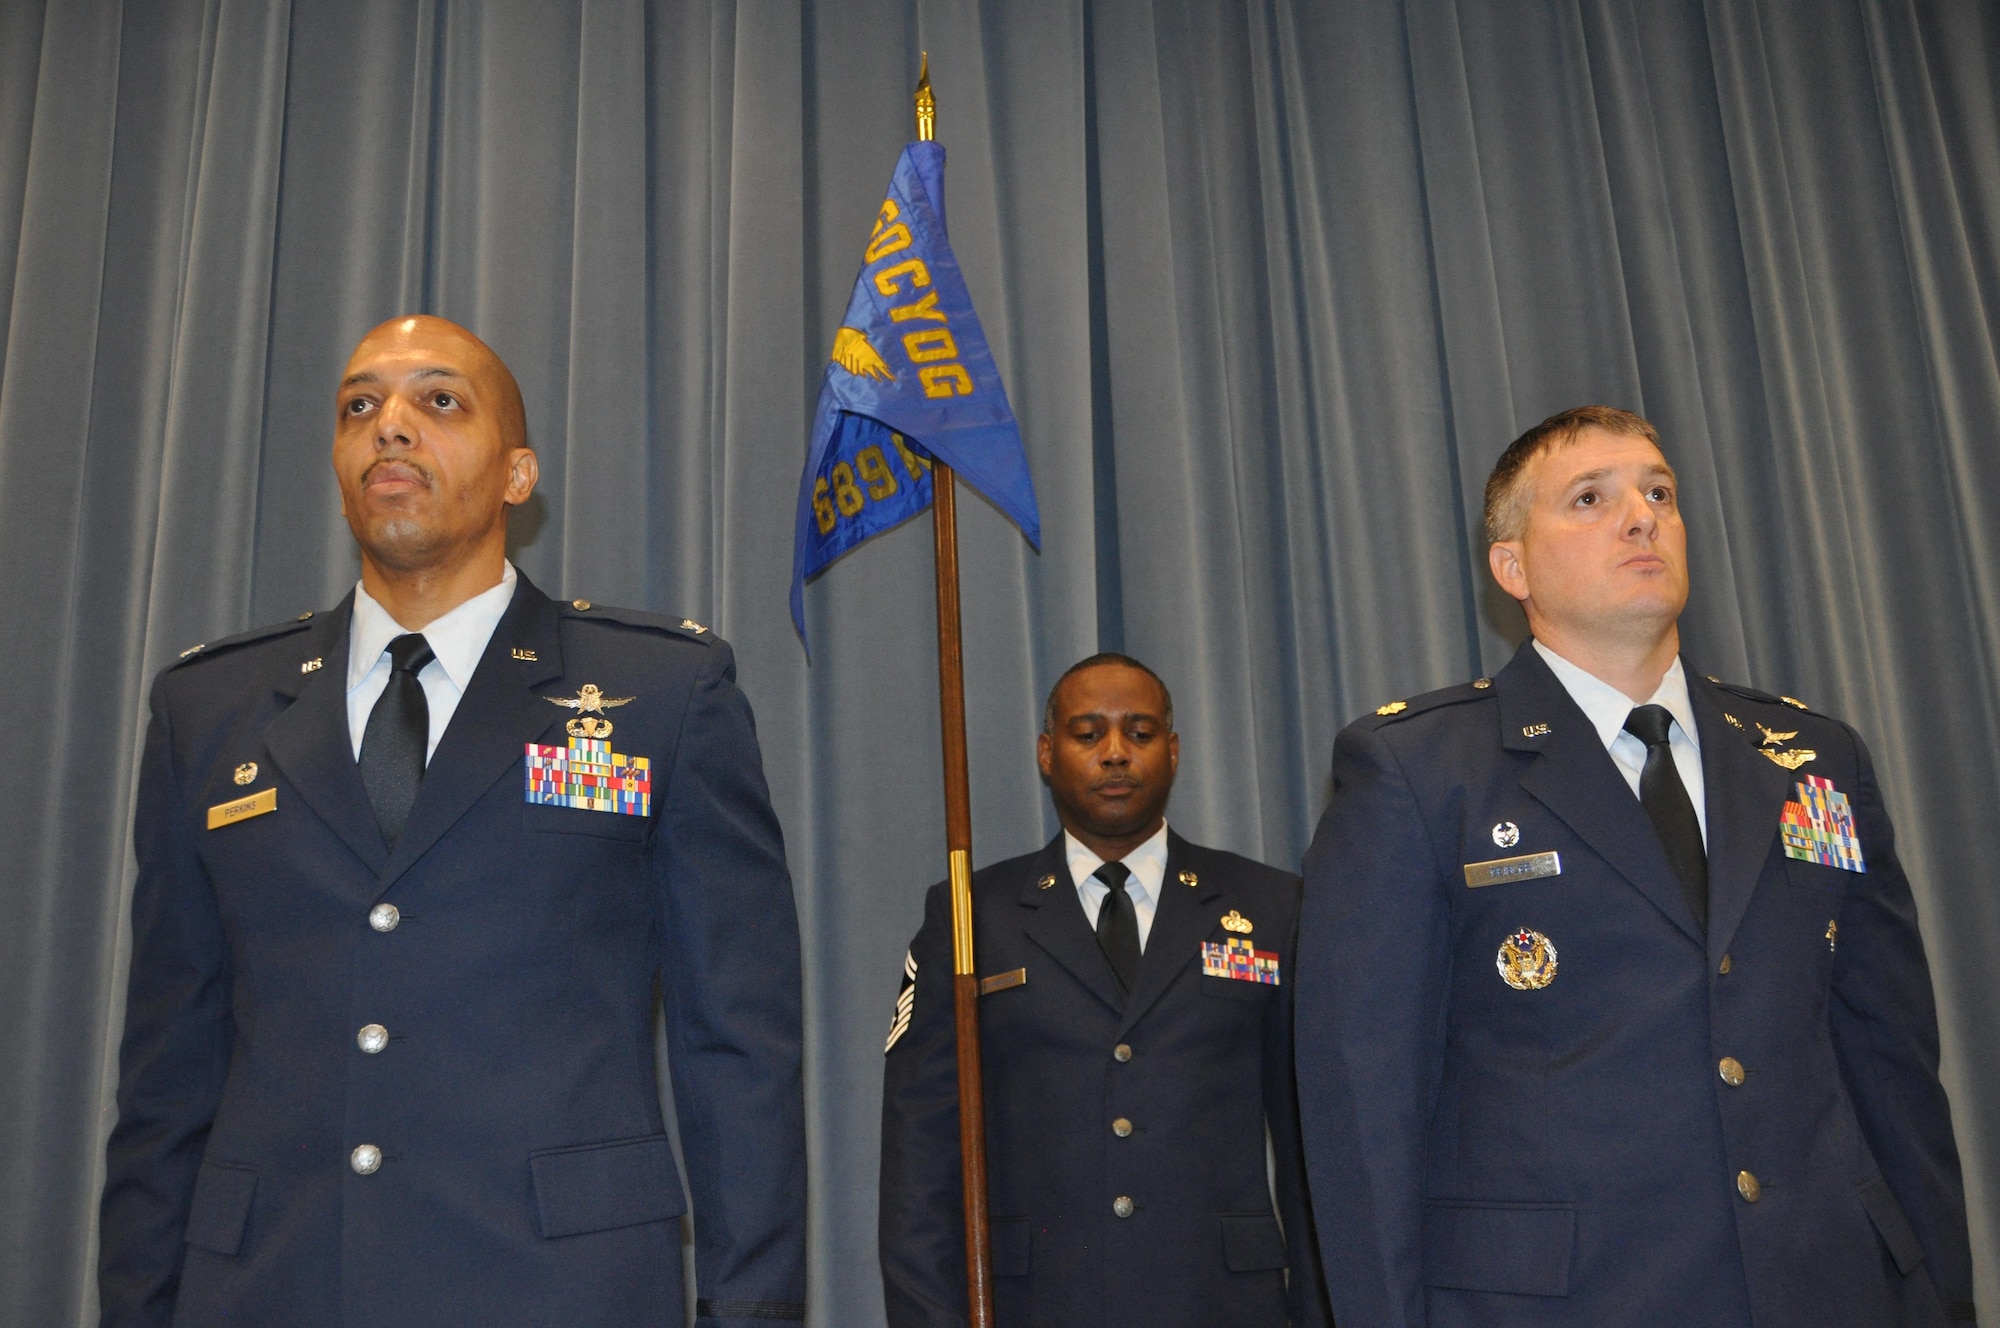 Commander of the 960th Cyberspace Operations Group, Col. Anthony Perkins, left, and Maj. Kevin Deibler, commander of the 689th Networks Operations Squadron, participate in an Assumption of Command ceremony Feb. 12, at Gunter Annex. The 689th is the Air Force’s newest Net Ops Squadron in the Cyber fight. (U.S. Air Force photo by Bradley J. Clark)